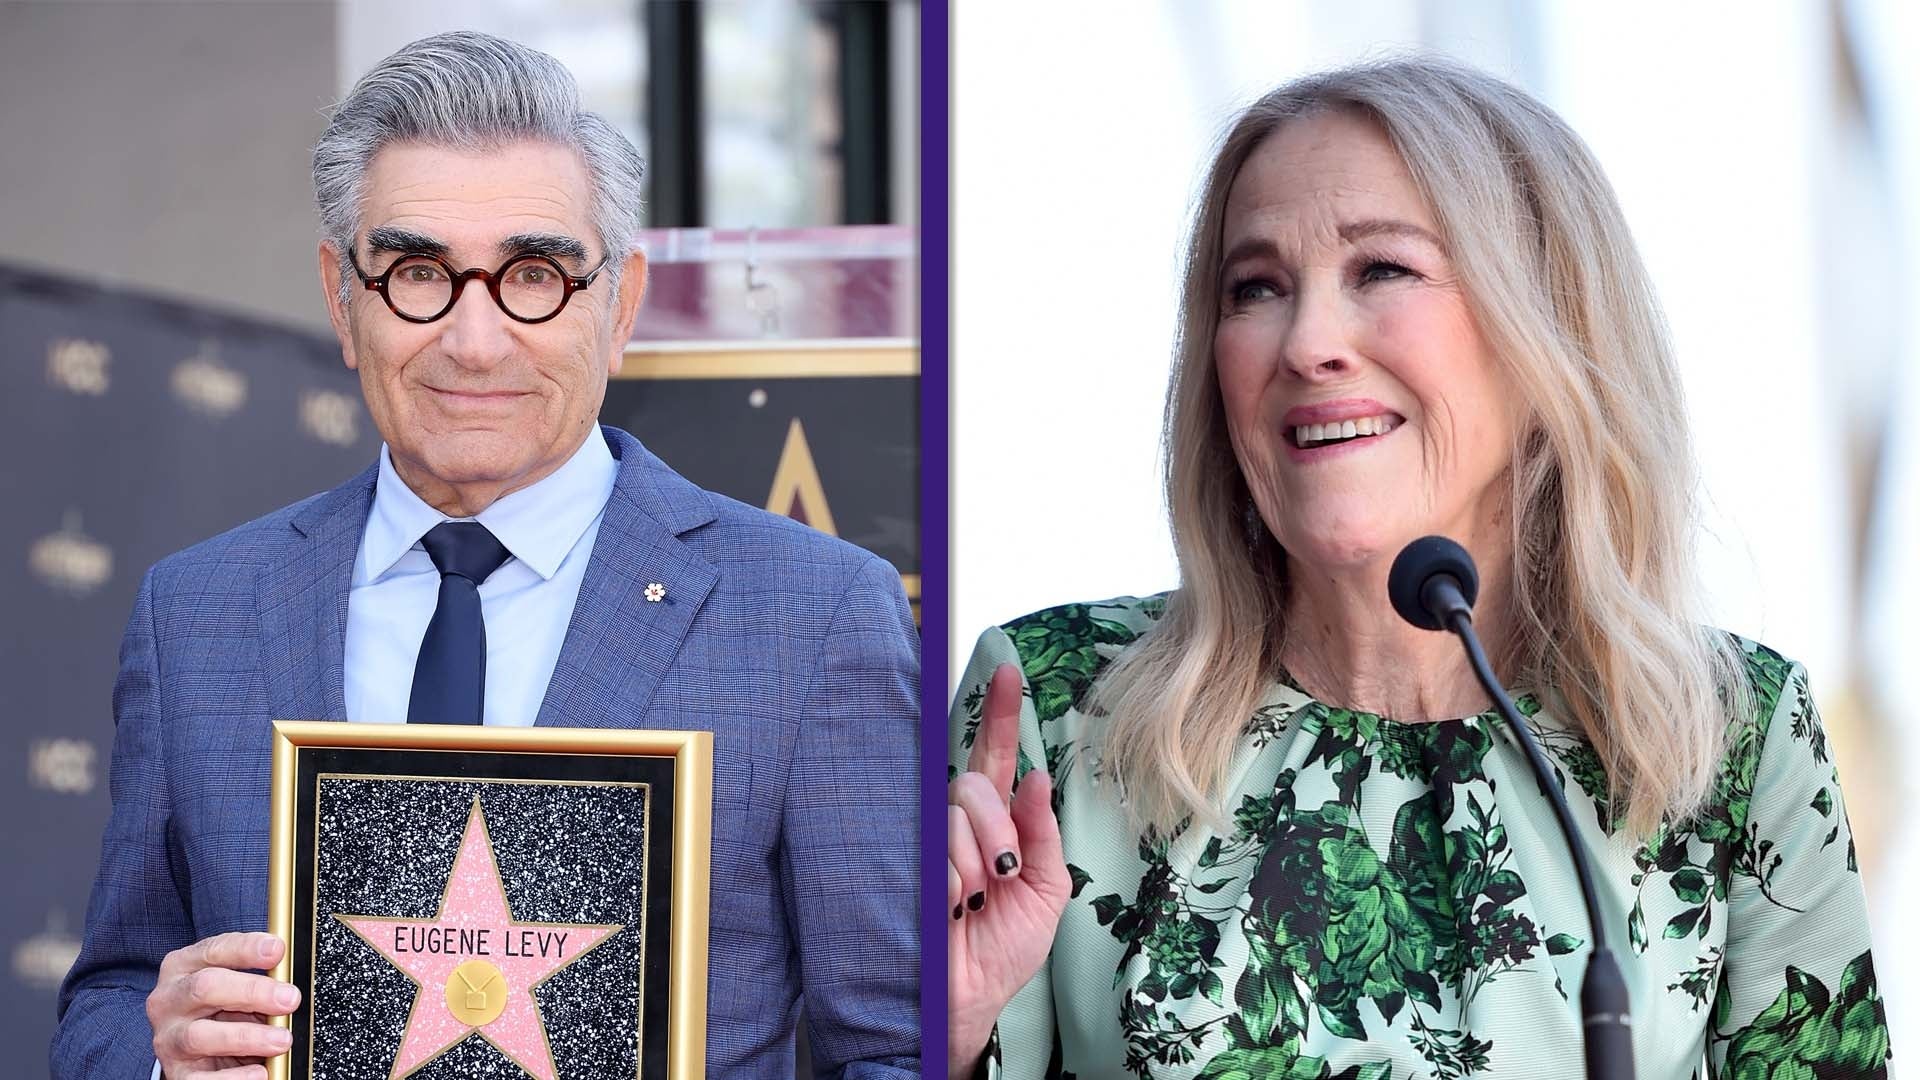 Eugene Levy's Walk of Fame Ceremony: Watch Catherine O'Hara and Daughter Sarah's Speeches